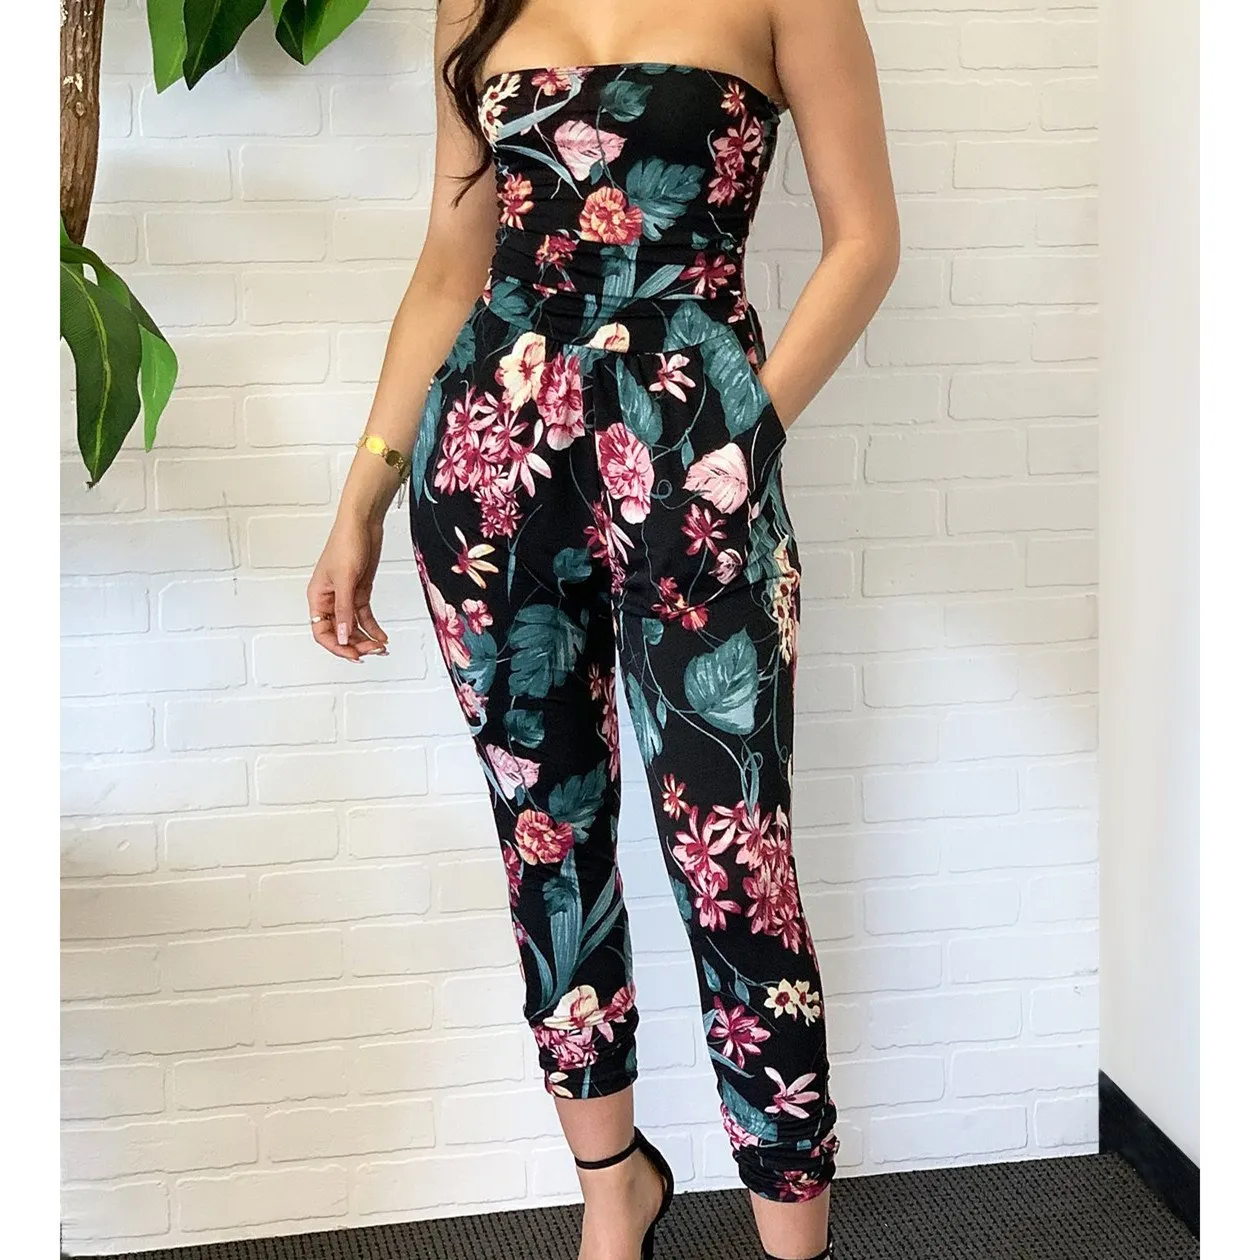 Women Off Shoulder Floral Printed Jumpsuit Strapless Fitted Sleeveless Bodycon Rompers Casual Summer Overalls